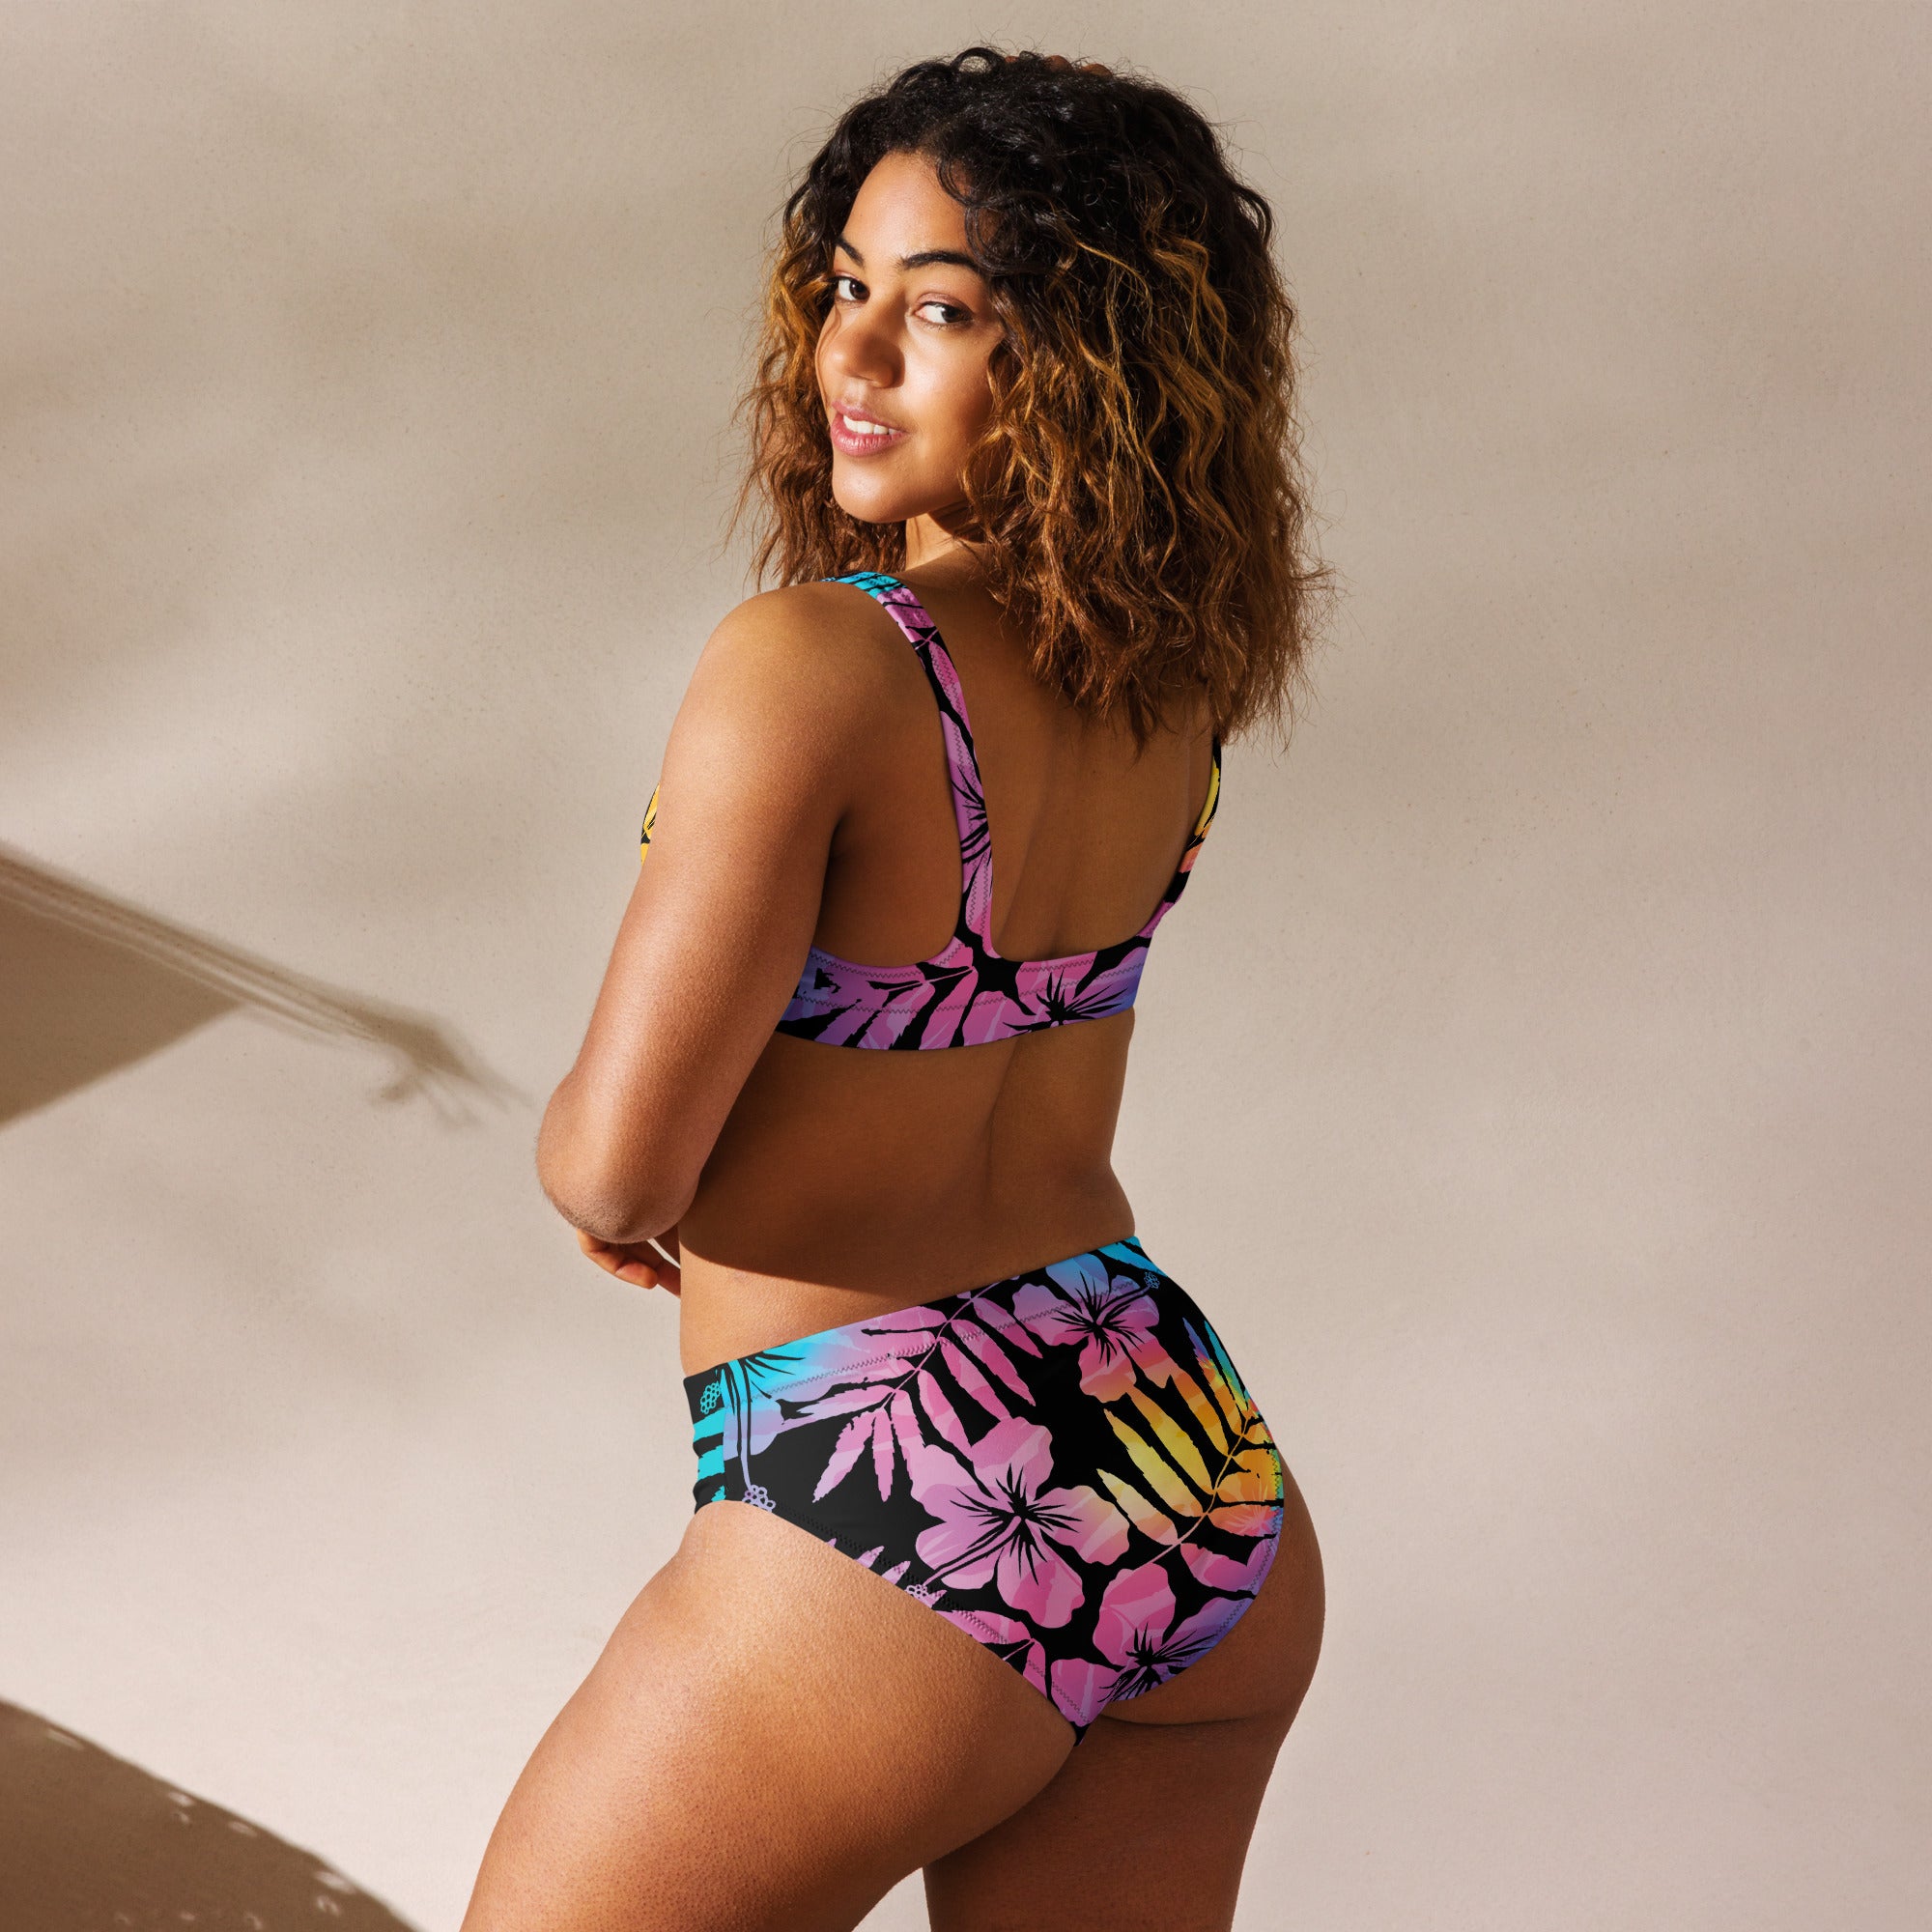 His Hers Matching Couples Swimsuit Set, Bikini + Swim Trunks - Ombre  Hibiscus Floral